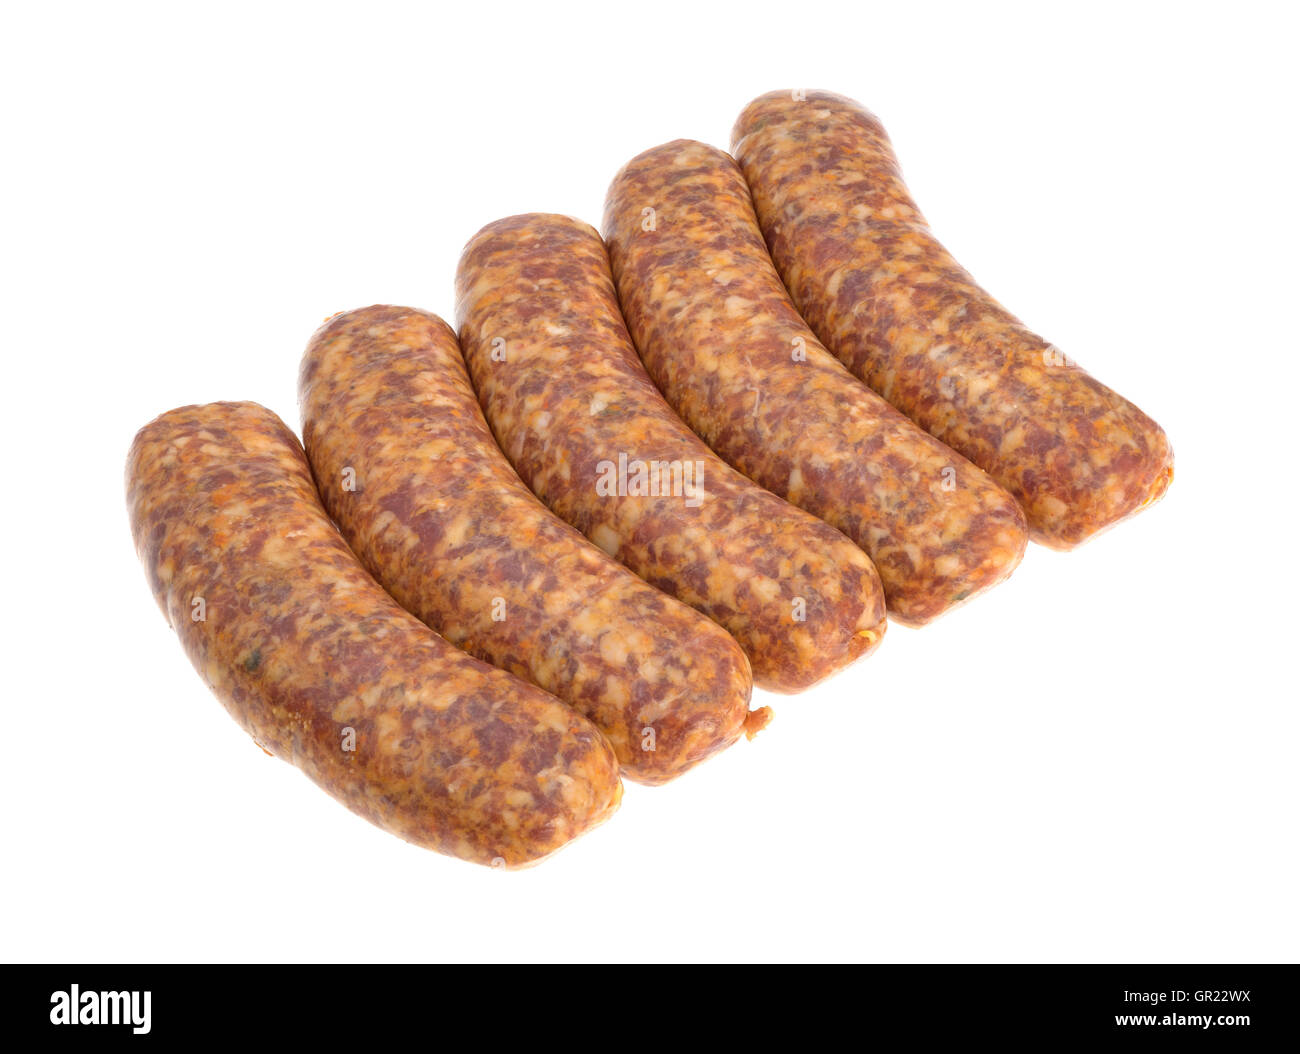 Several spicy bratwurst links on a white background. Stock Photo